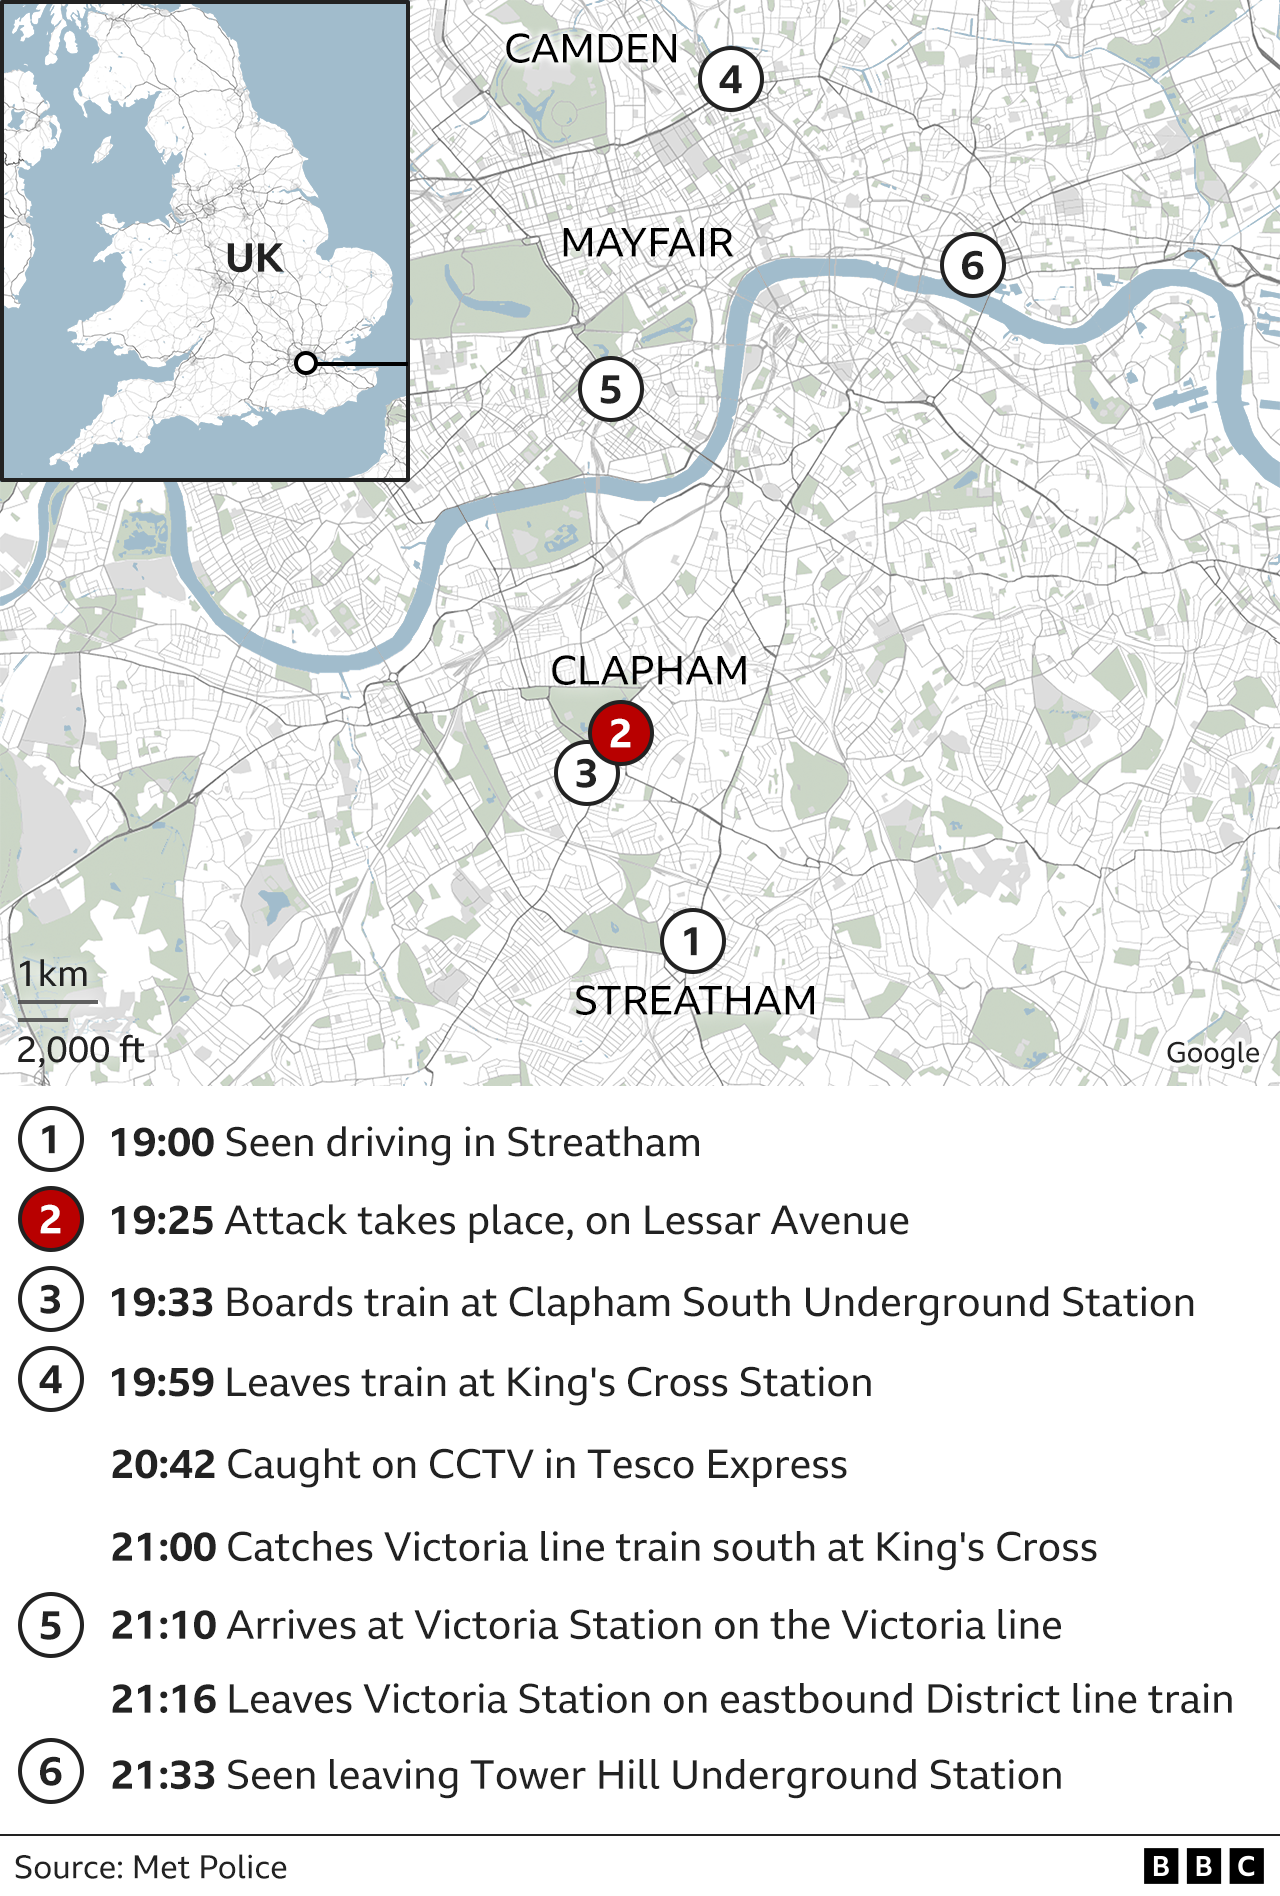 Map showing location and timings of sightings of Ezidi's car and movements on London Underground - 19:00 car seen in Streatham, 19:25 attack takes place in Lessar Avenue,19:33 Ezidi boards Tube train at Clapham South, 19:59 Arrives at King's Cross station, 20:42 in Tesco Express, 21:00 catches Victoria line train at King's Cross, 21:10 arrives at Victoria Station, 21:16 leaves on District line, 21:33 seen leaving Tower Hill Underground station